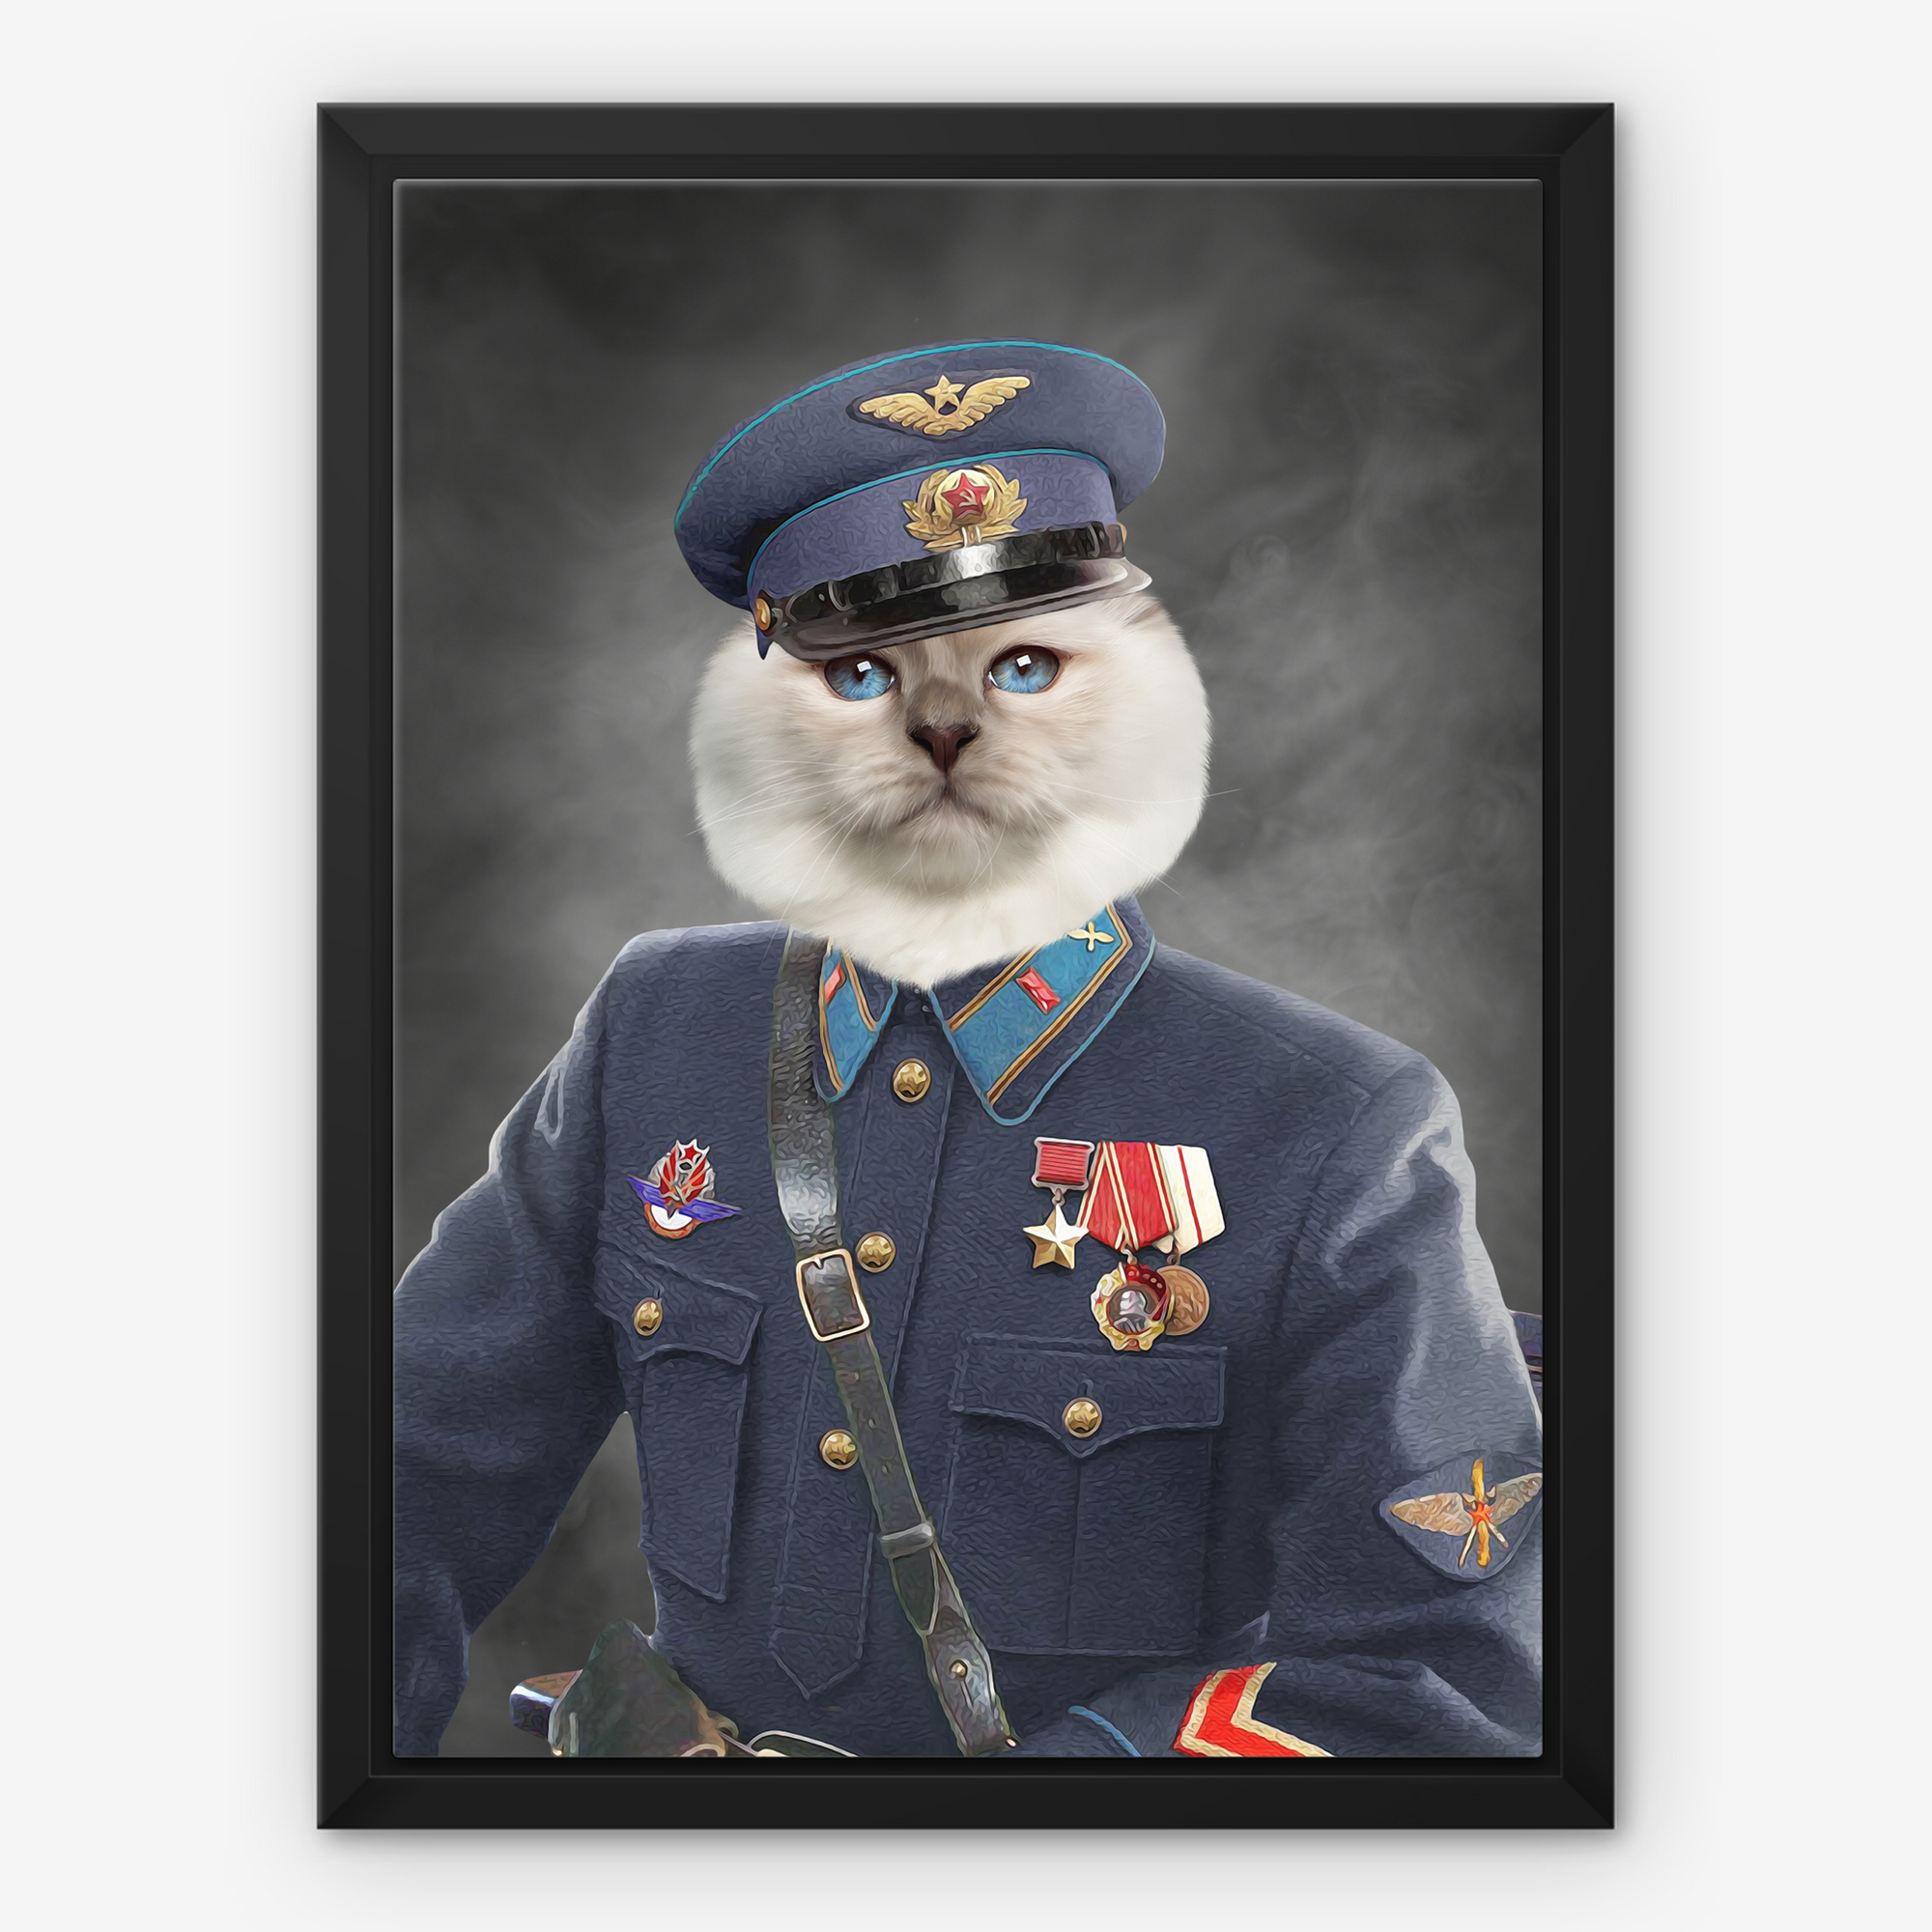 The Decorated Soldier: Custom Pet Canvas